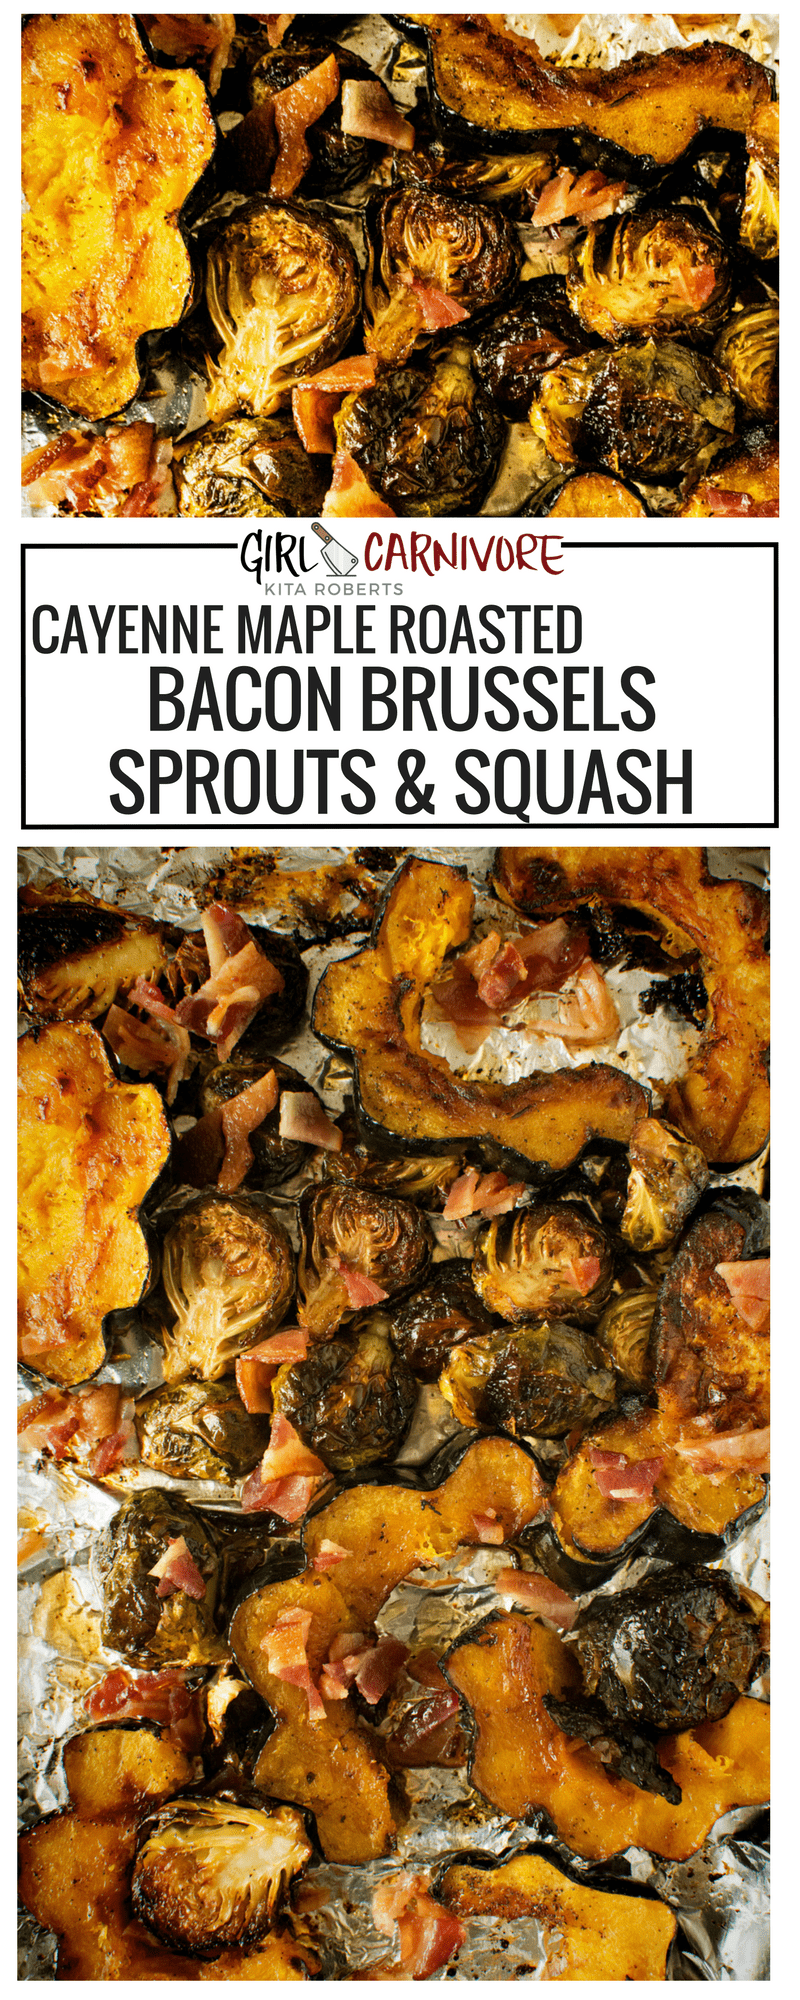 Cayanne Maple Roasted Bacon Brussels Sprouts and Squash | Recipe at GirlCarnivore.com